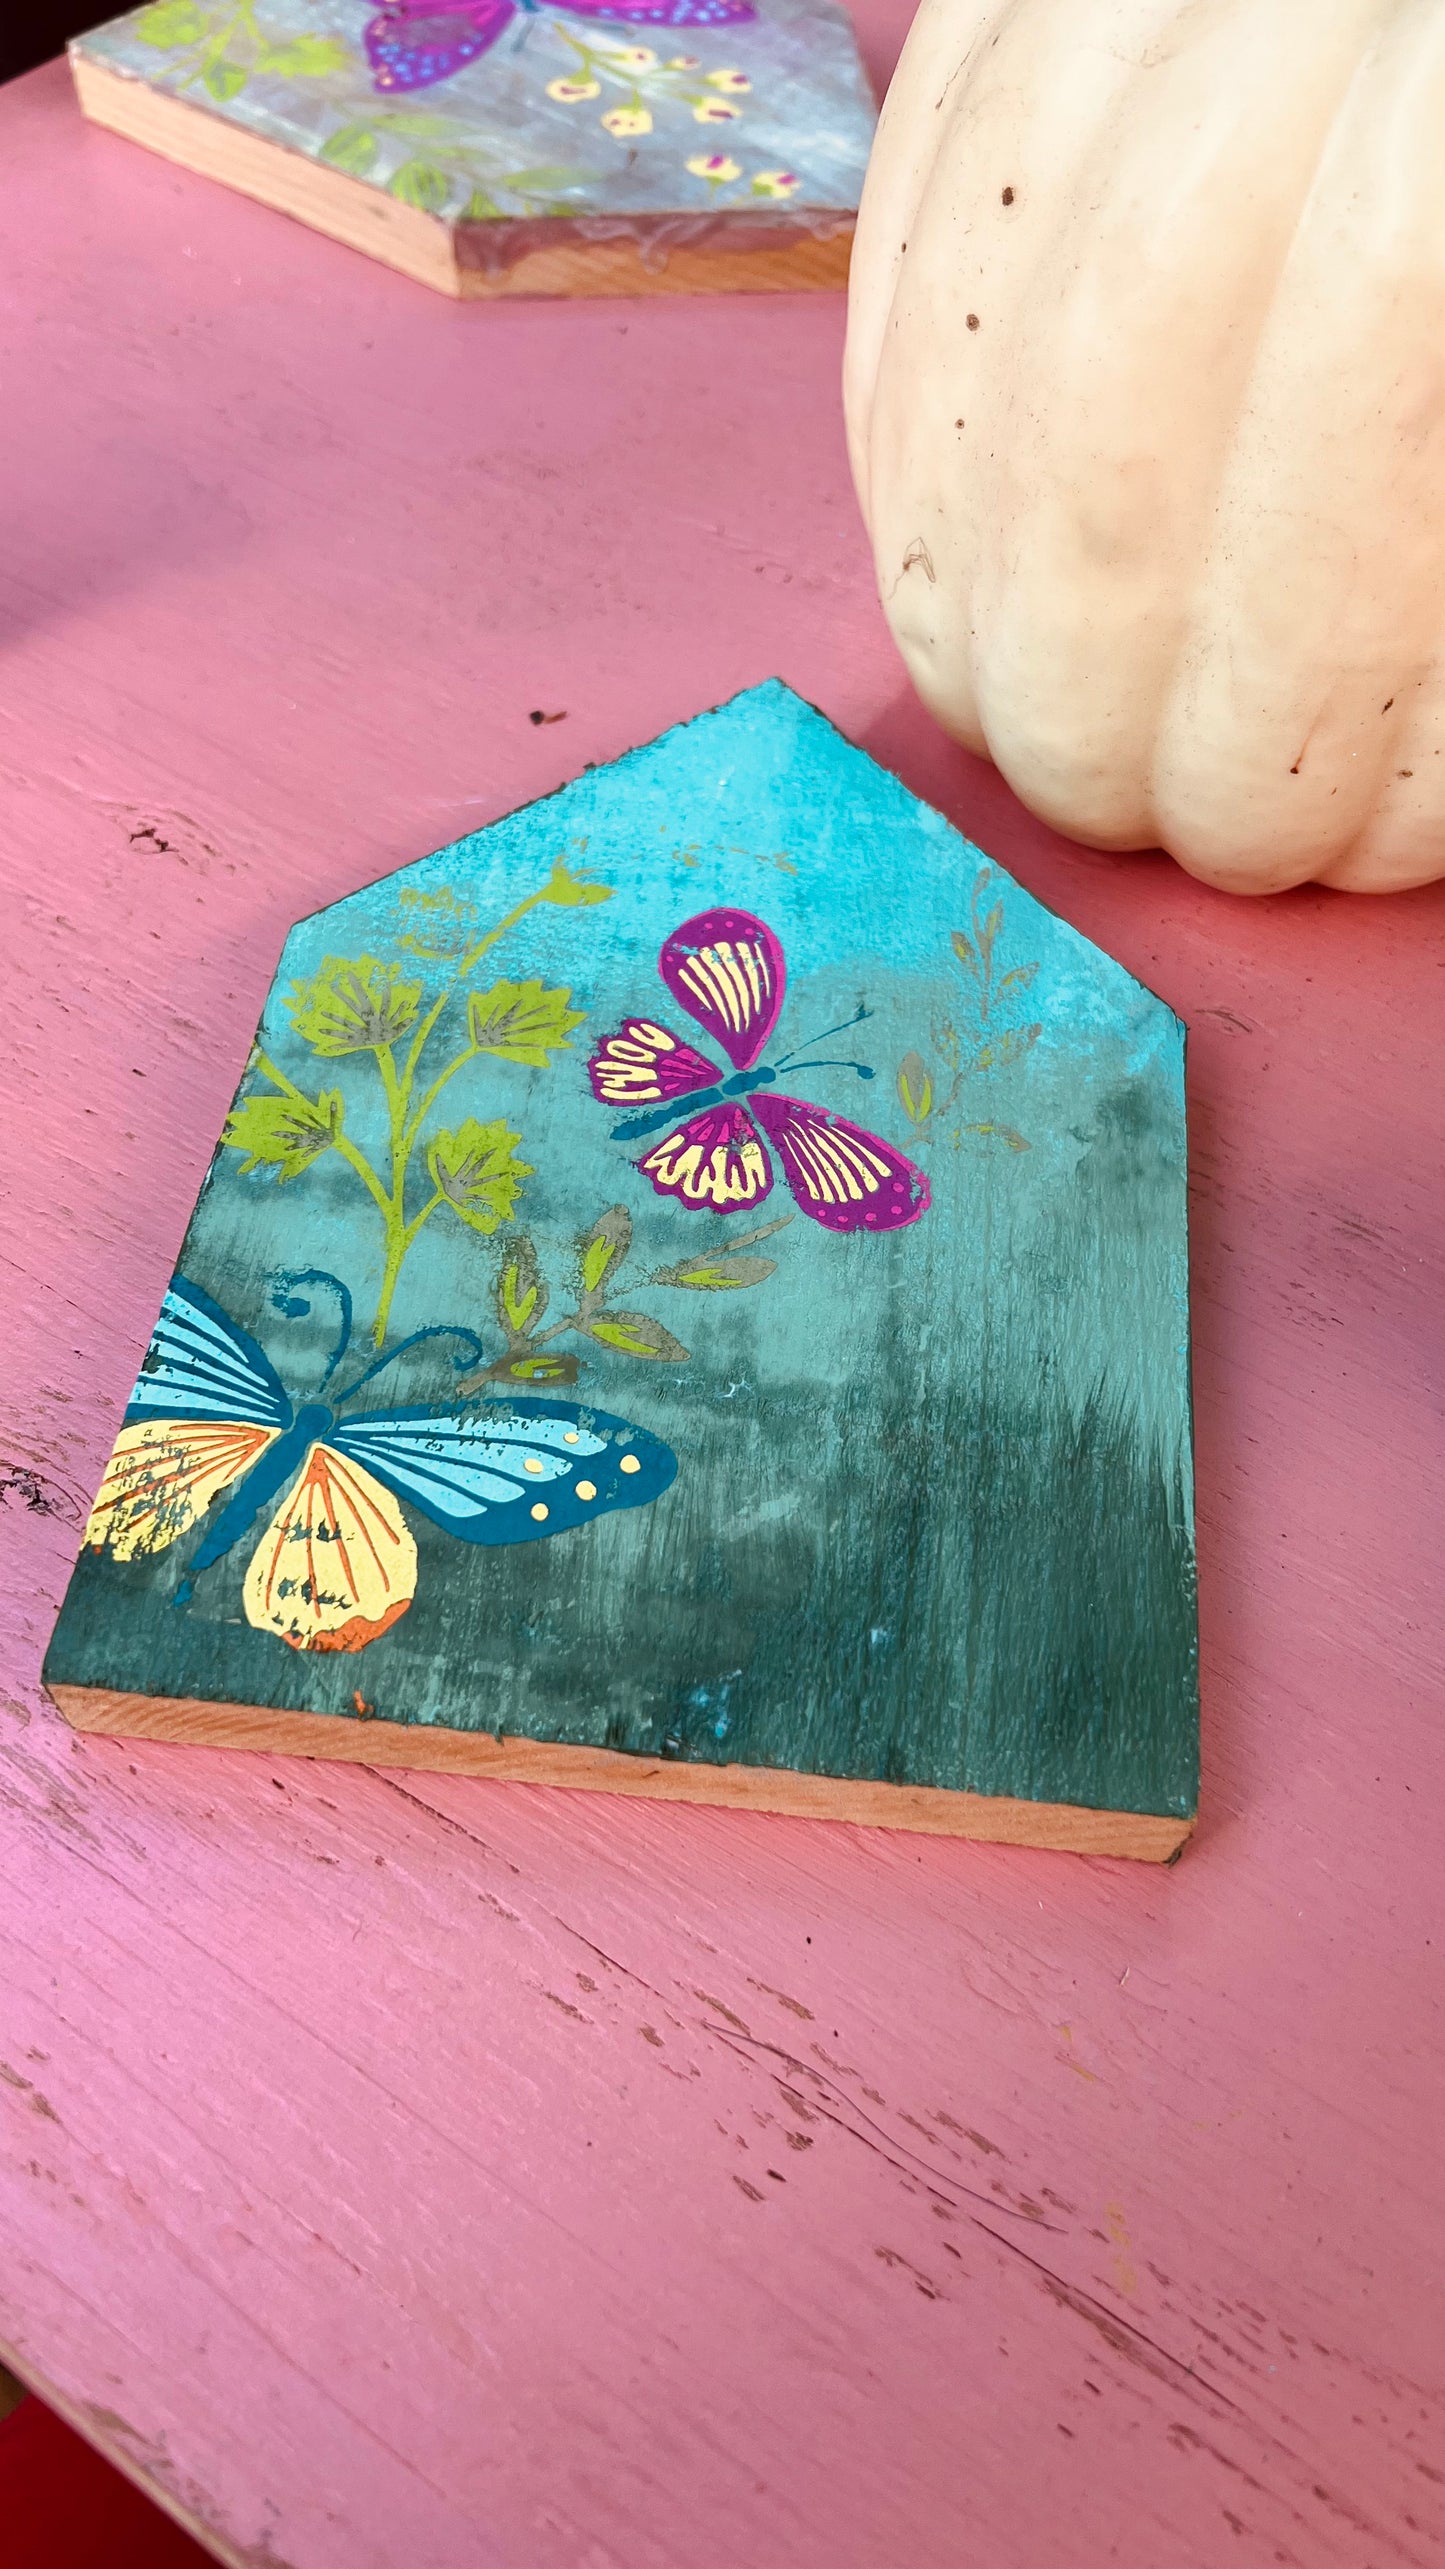 Decoupage Blending Thursday May 9th @6pm Mixed Media Workshop